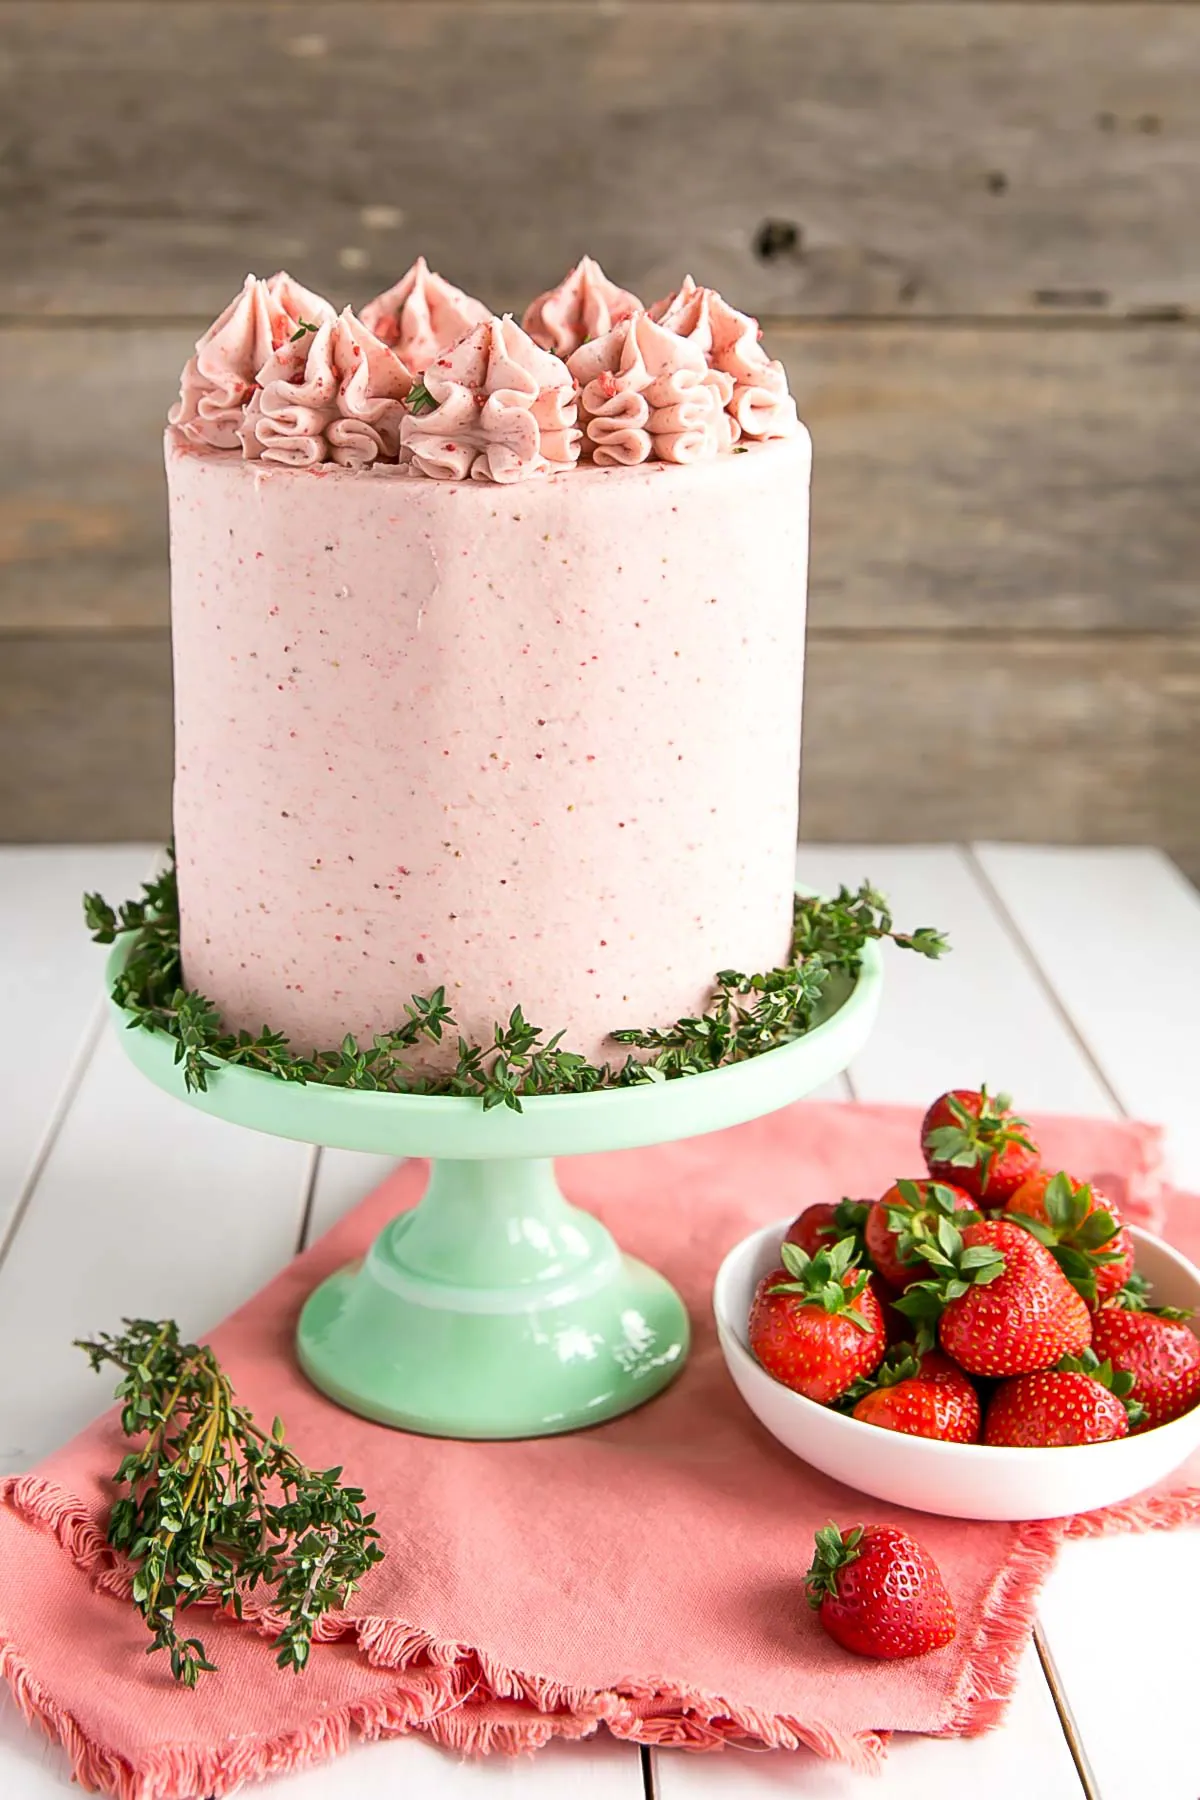 No artificial colors or flavours in this from scratch Strawberry Cake recipe!